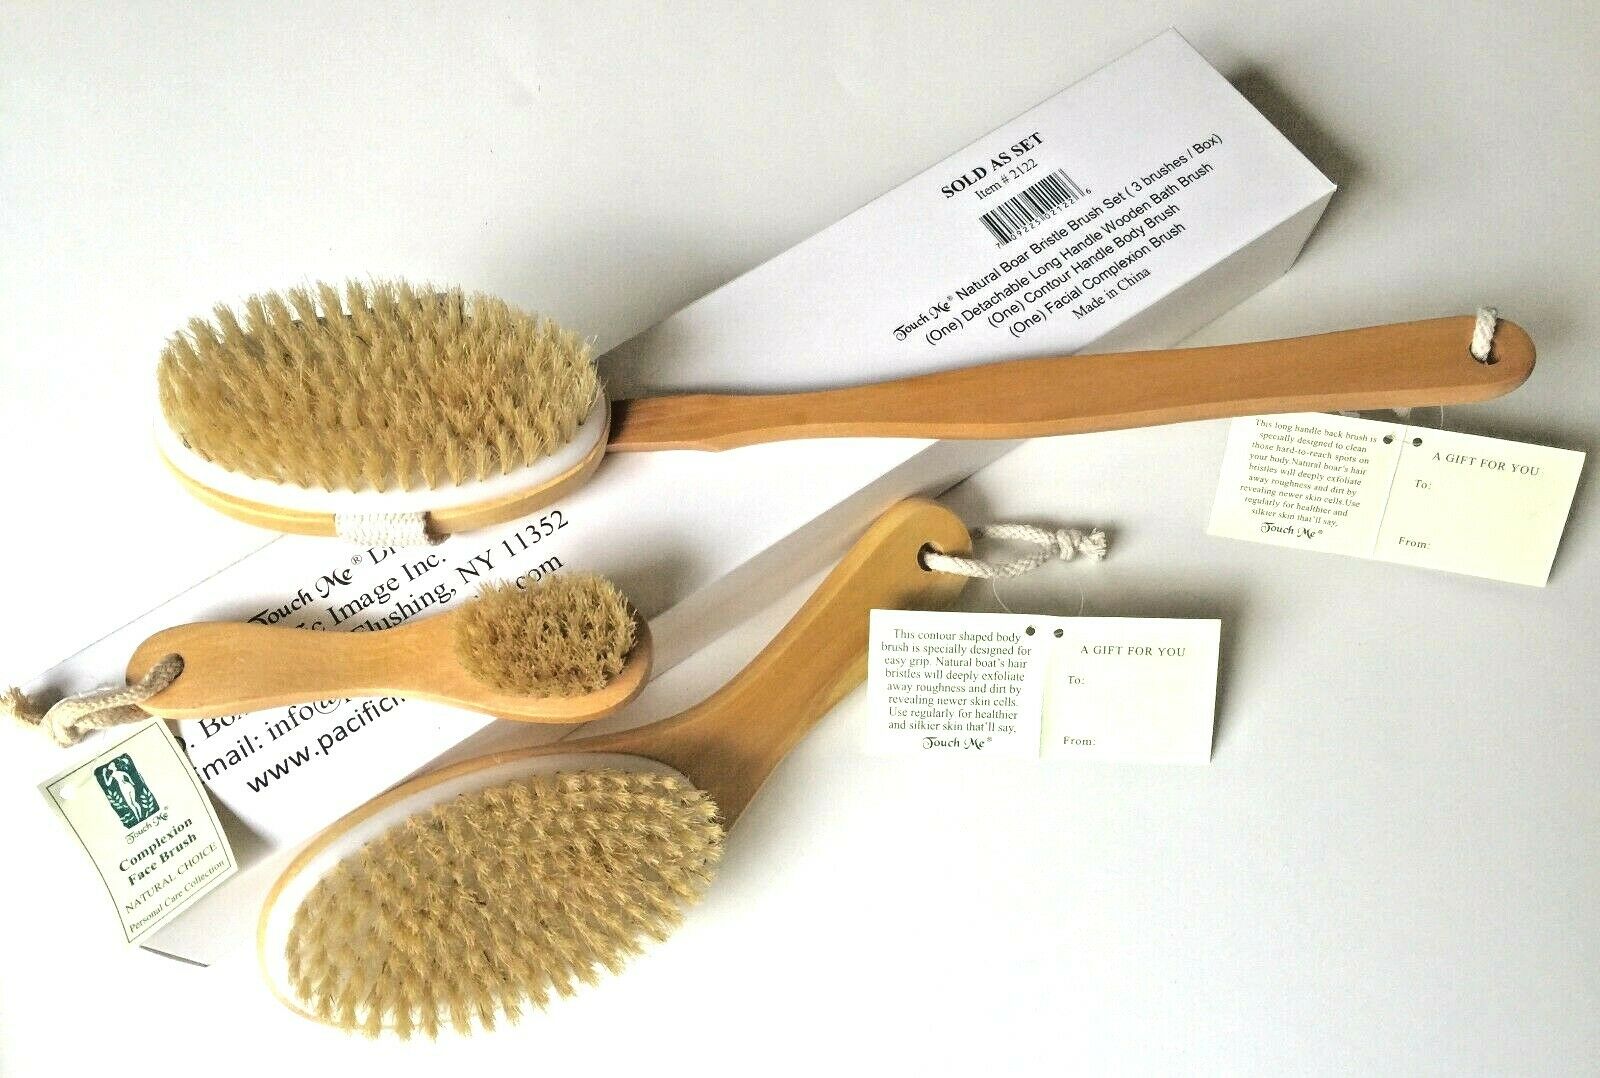 3 Brushes /set Touch Me Natural Boar Bristle Wooden Dry Bath Brush, Body & Face